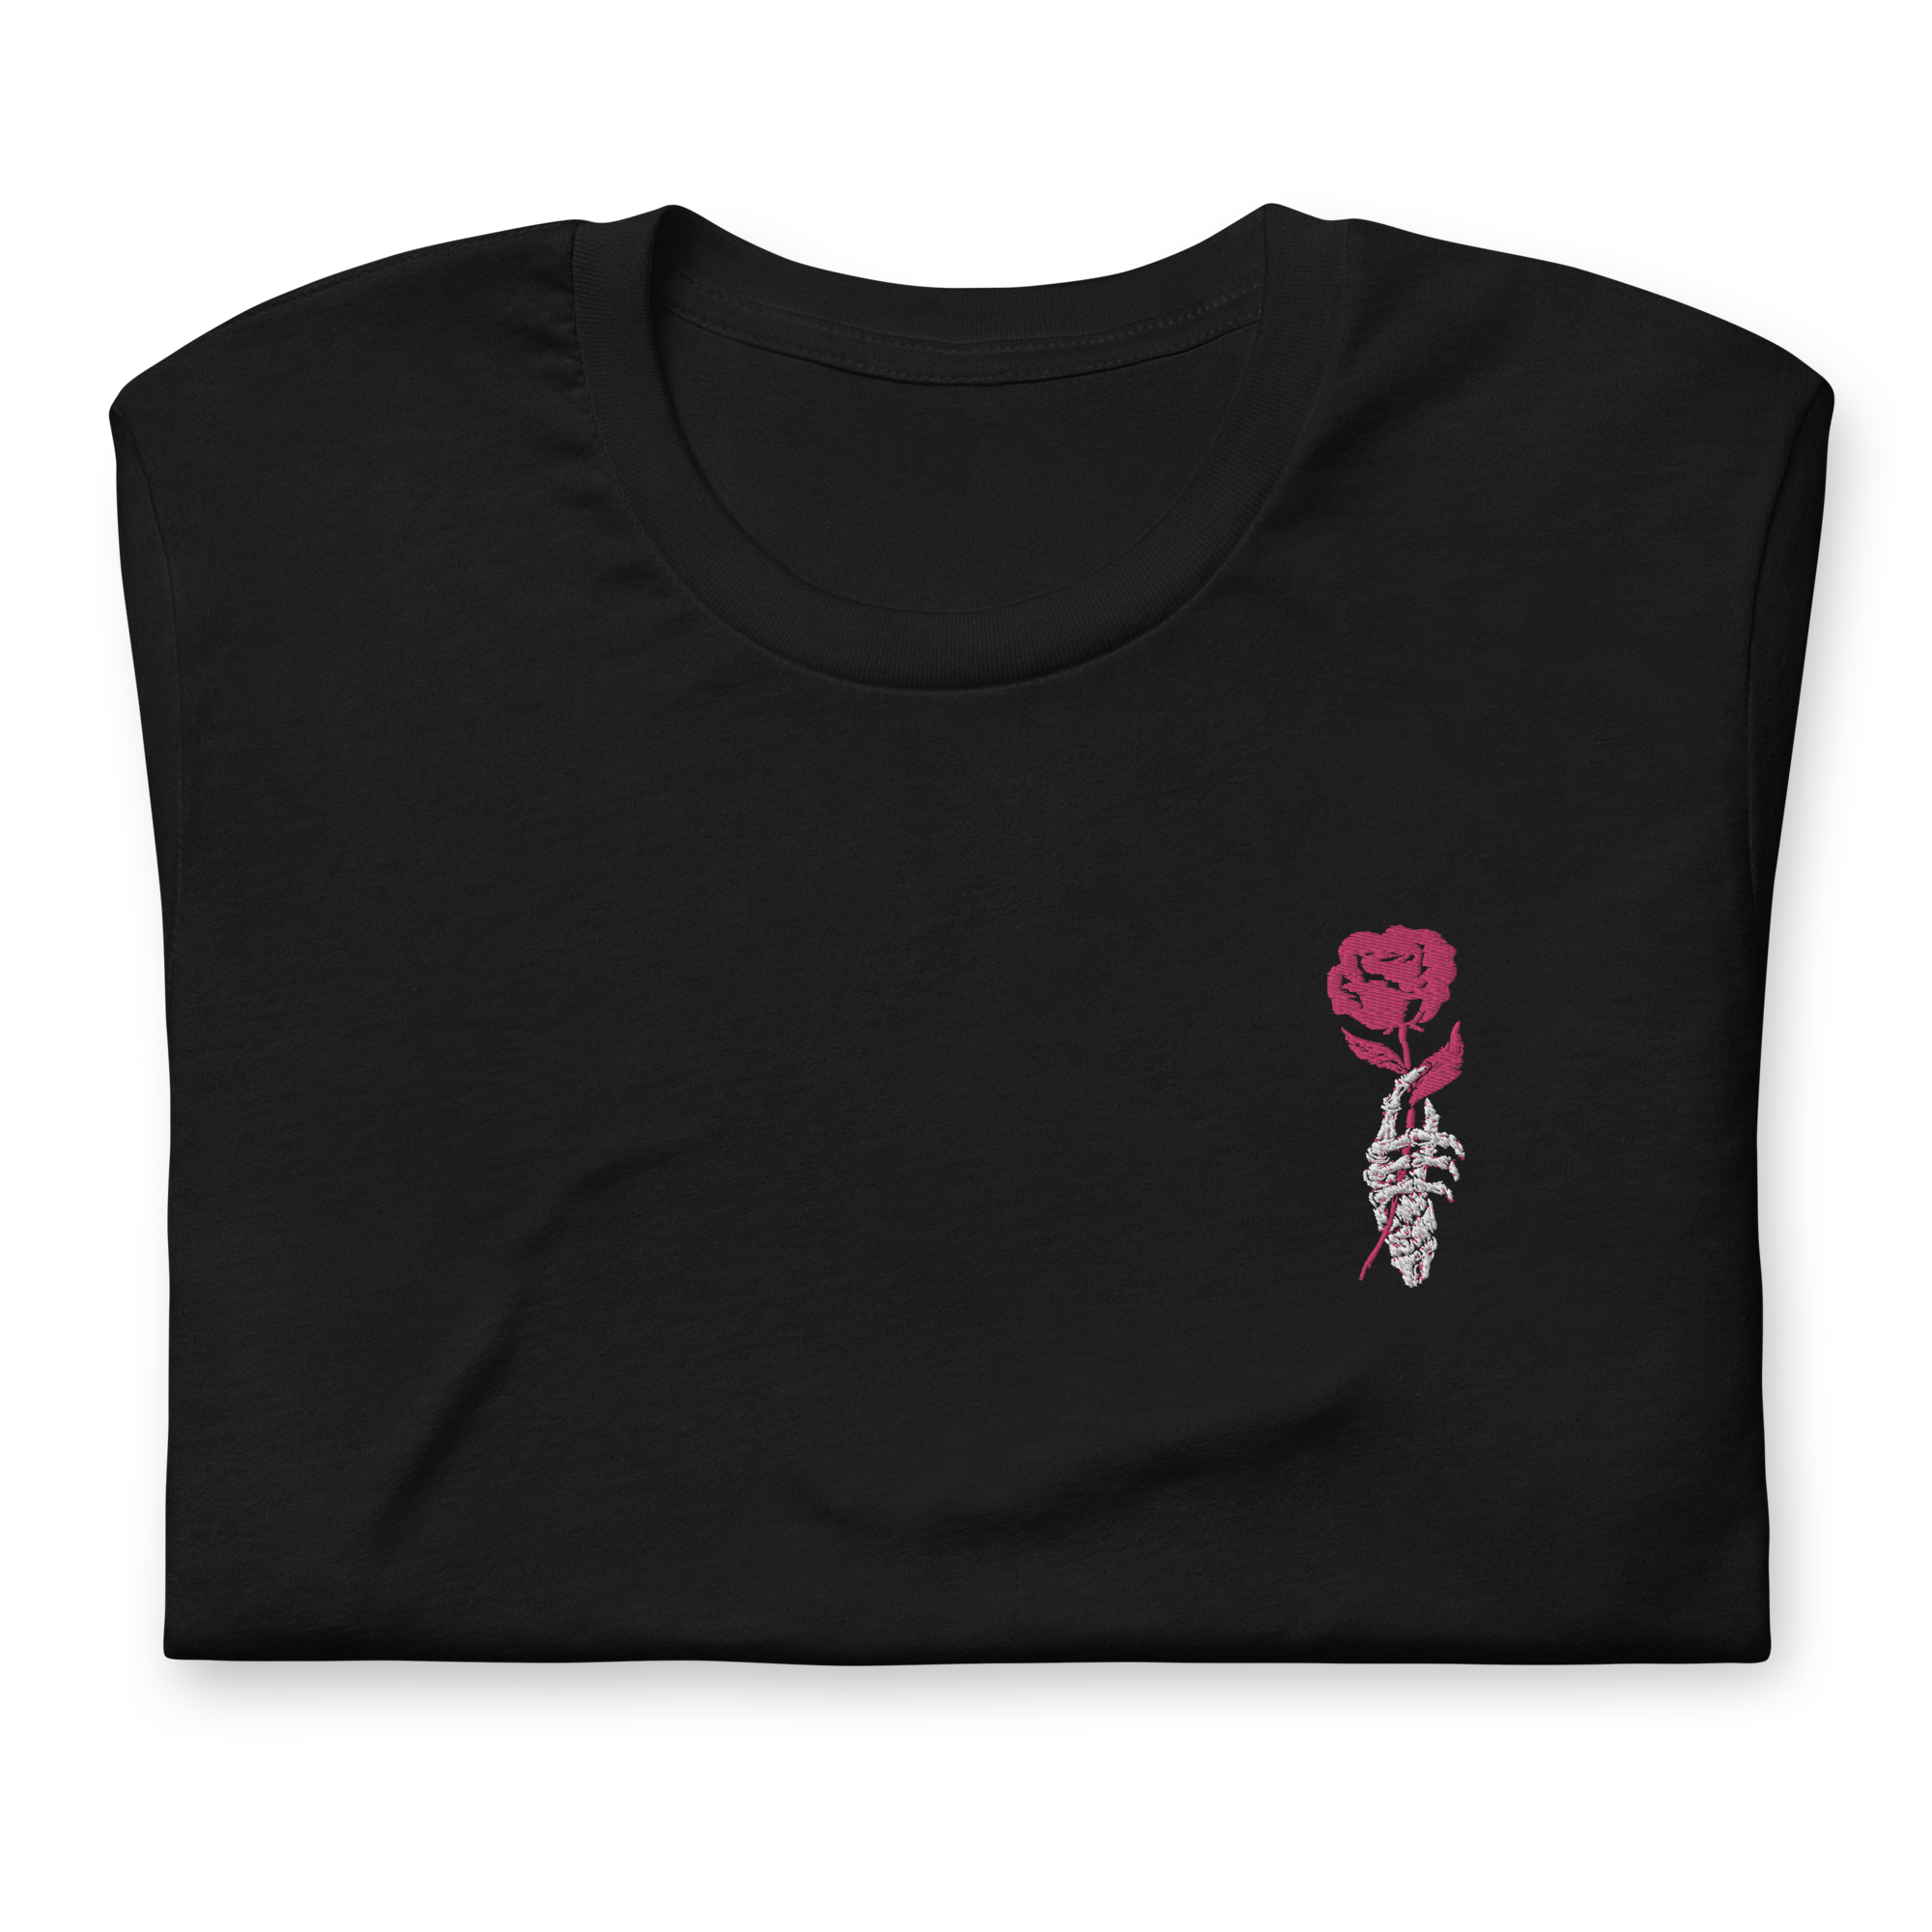 Mortal - Embroidery T-Shirt